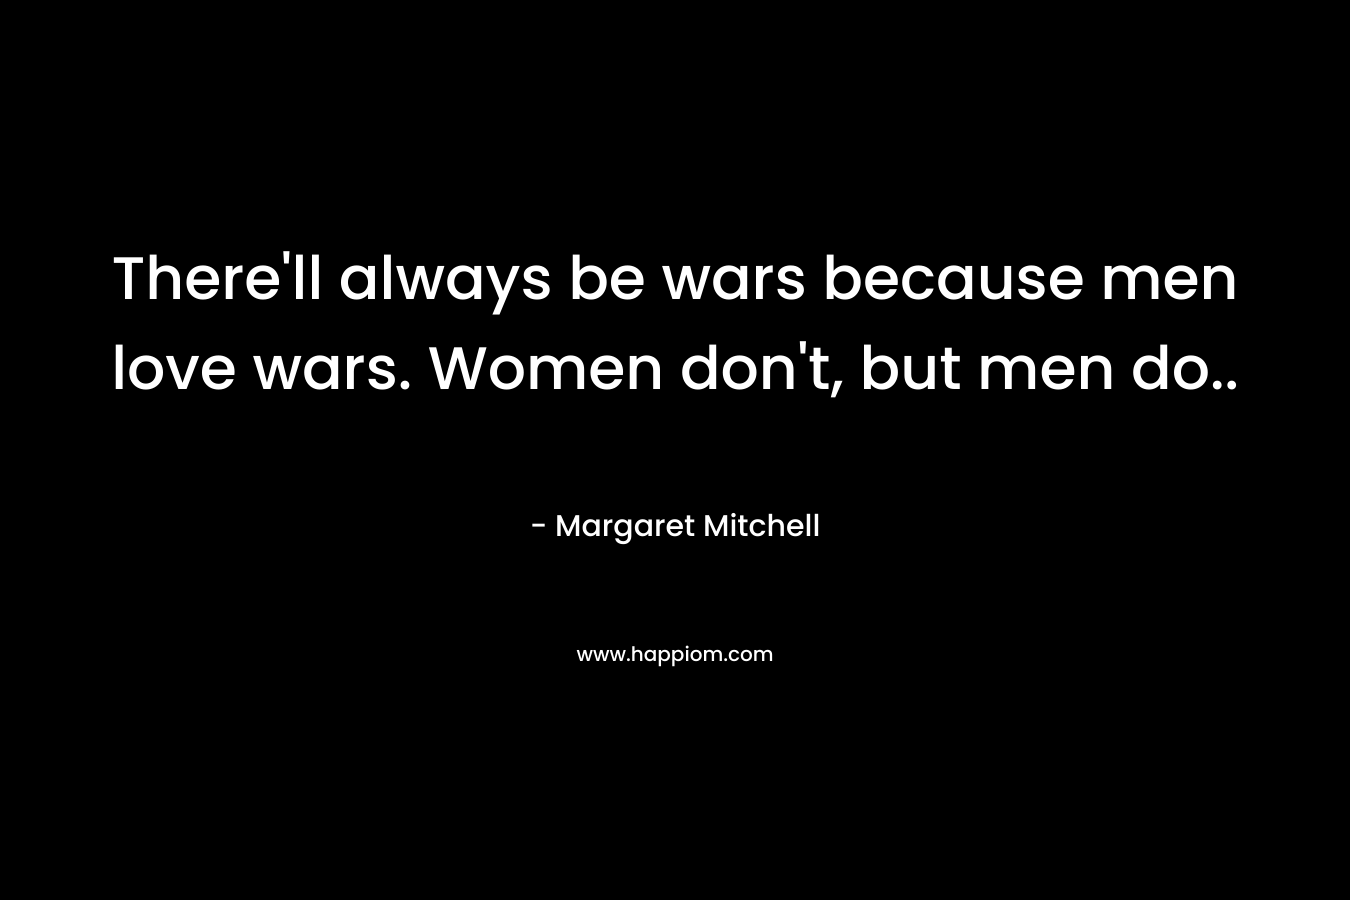 There'll always be wars because men love wars. Women don't, but men do..